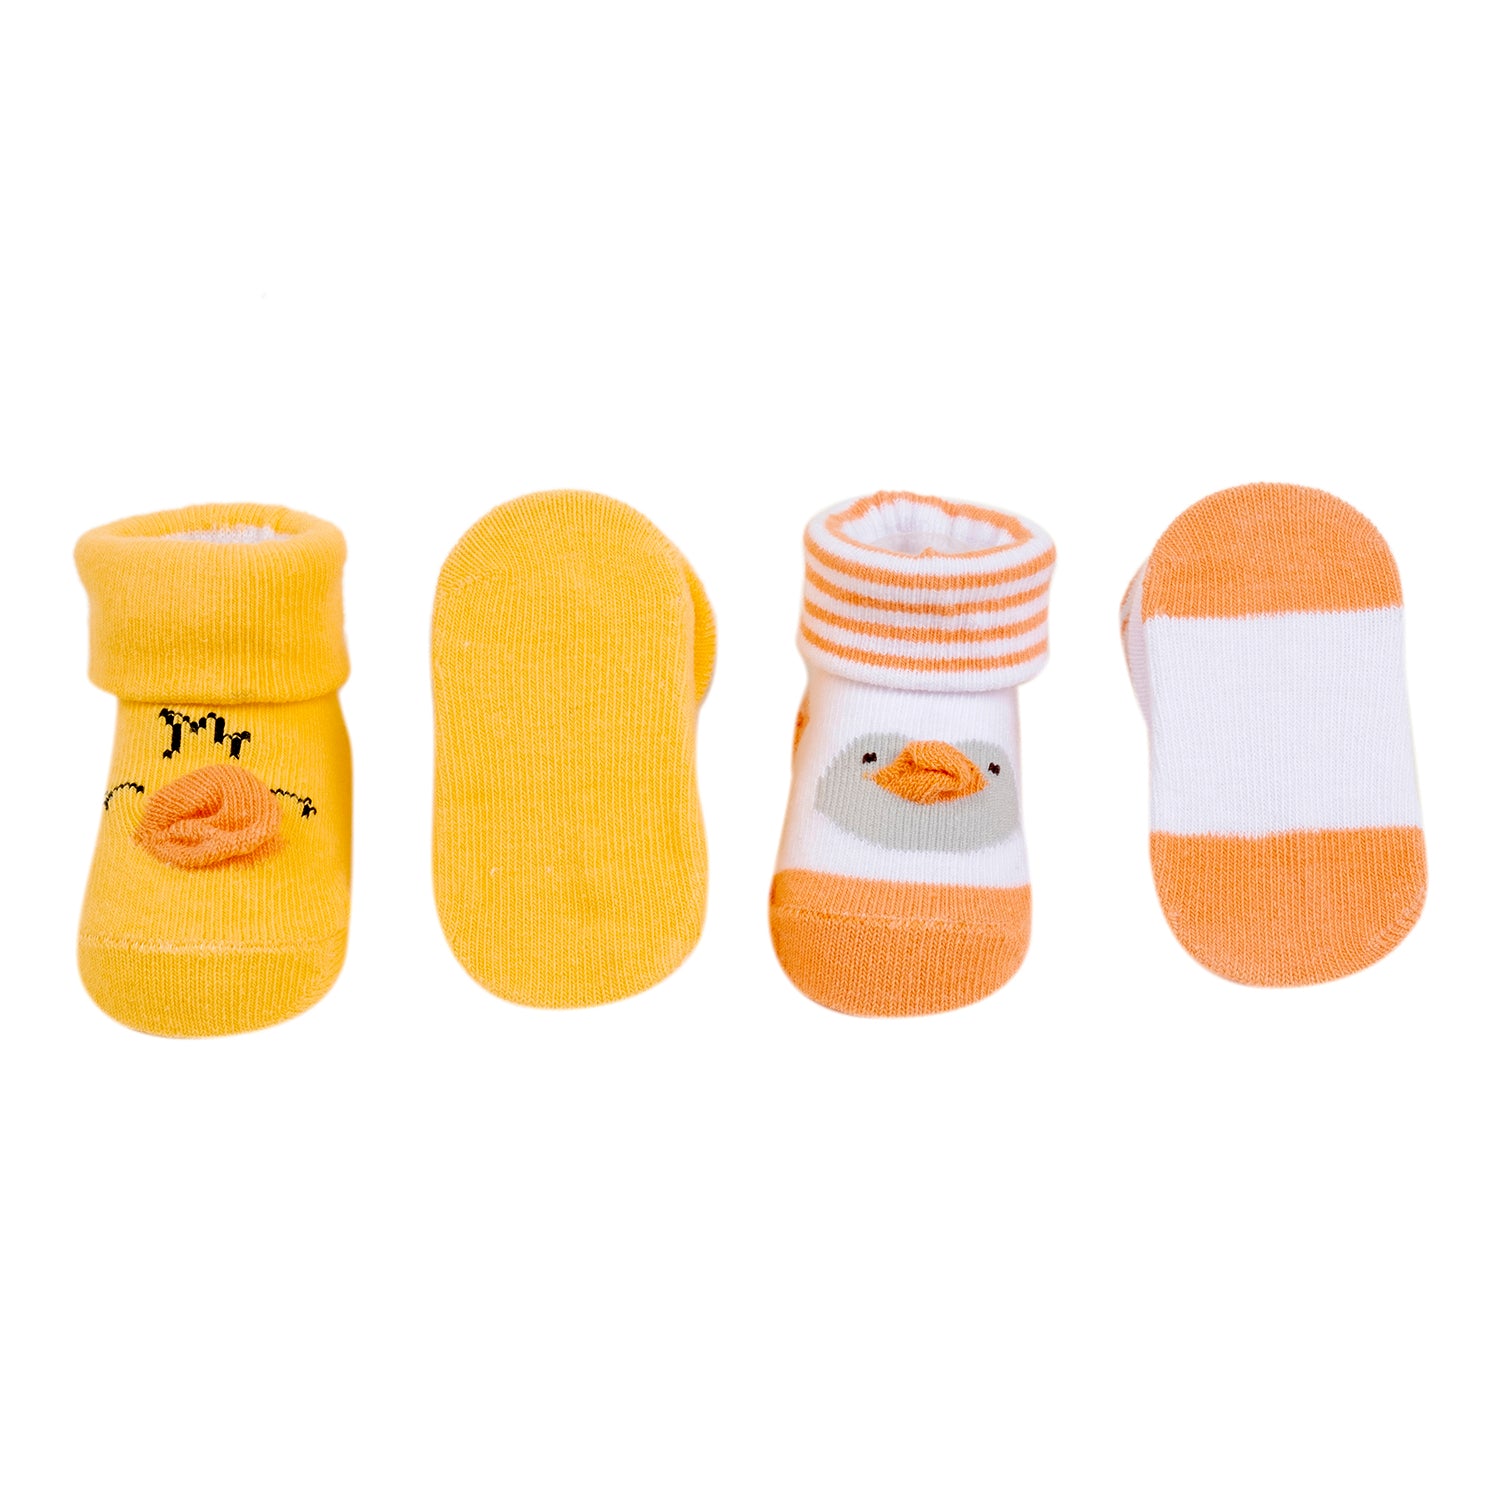 Baby Moo 3D Penguin Chick Cotton Ankle Length Infant Dress Up Walking Set of 2 Socks Booties - Yellow